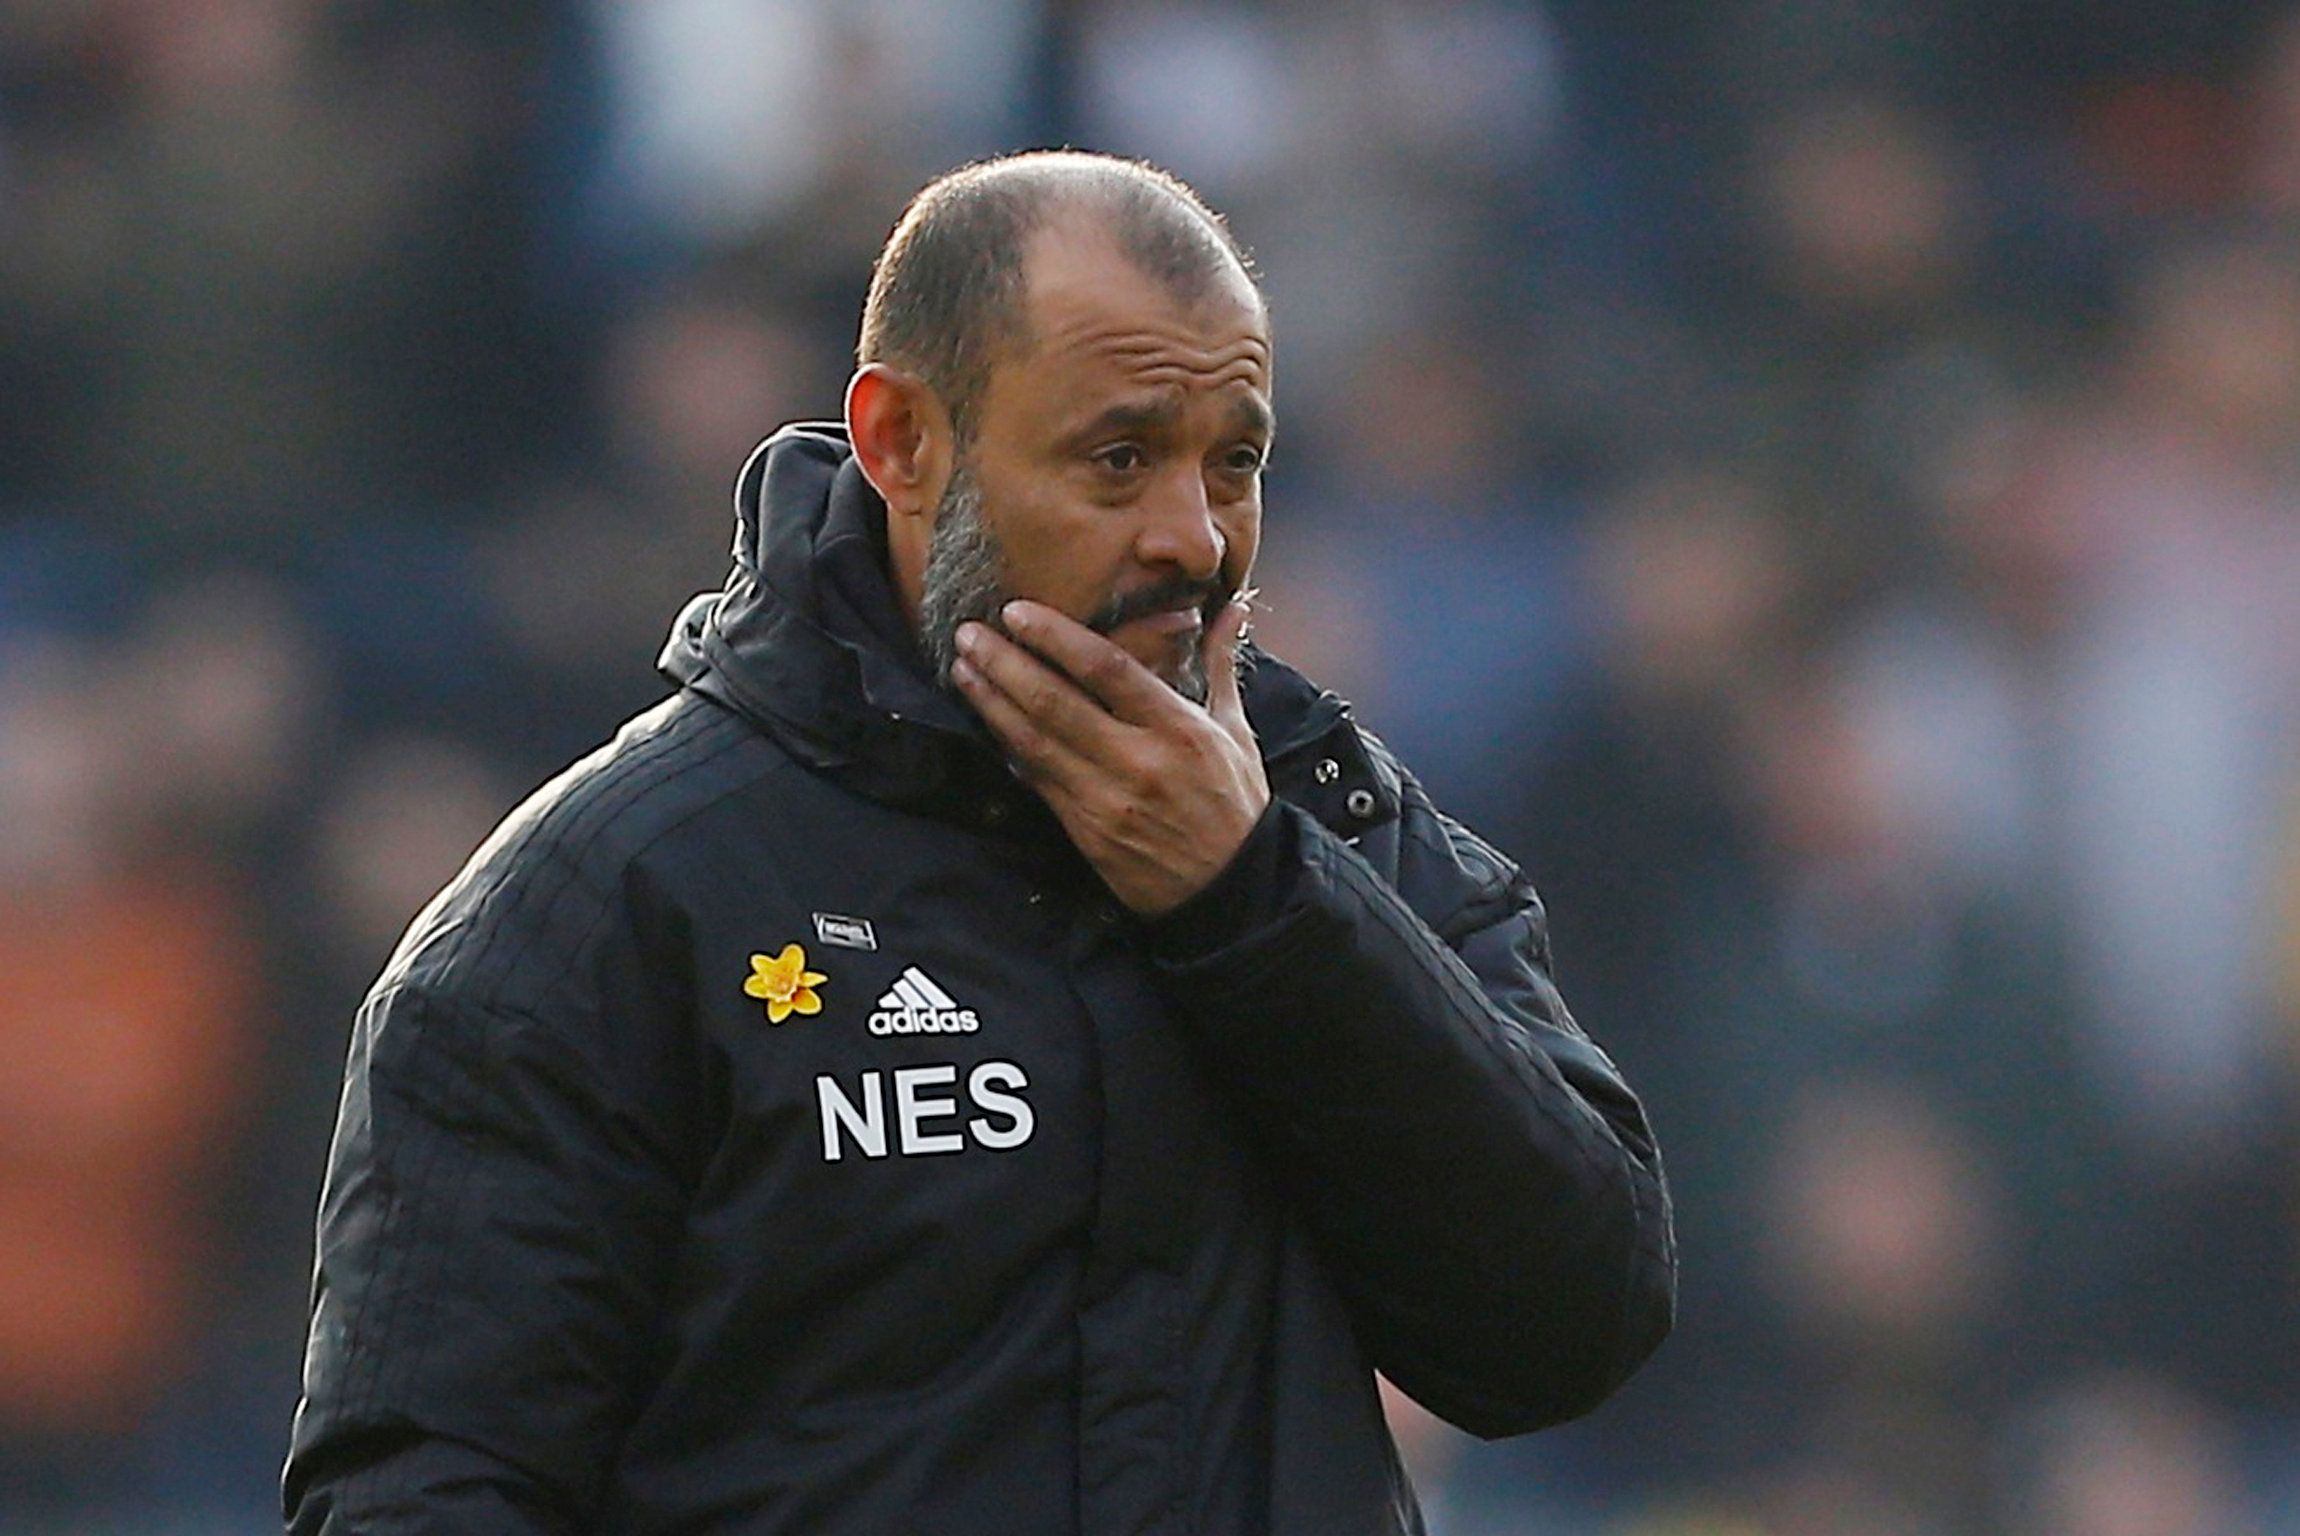 Soccer Football - Premier League - Burnley v Wolverhampton Wanderers - Turf Moor, Burnley, Britain - March 30, 2019  Wolverhampton Wanderers manager Nuno Espirito Santo reacts after the match        Action Images via Reuters/Craig Brough  EDITORIAL USE ONLY. No use with unauthorized audio, video, data, fixture lists, club/league logos or "live" services. Online in-match use limited to 75 images, no video emulation. No use in betting, games or single club/league/player publications.  Please conta